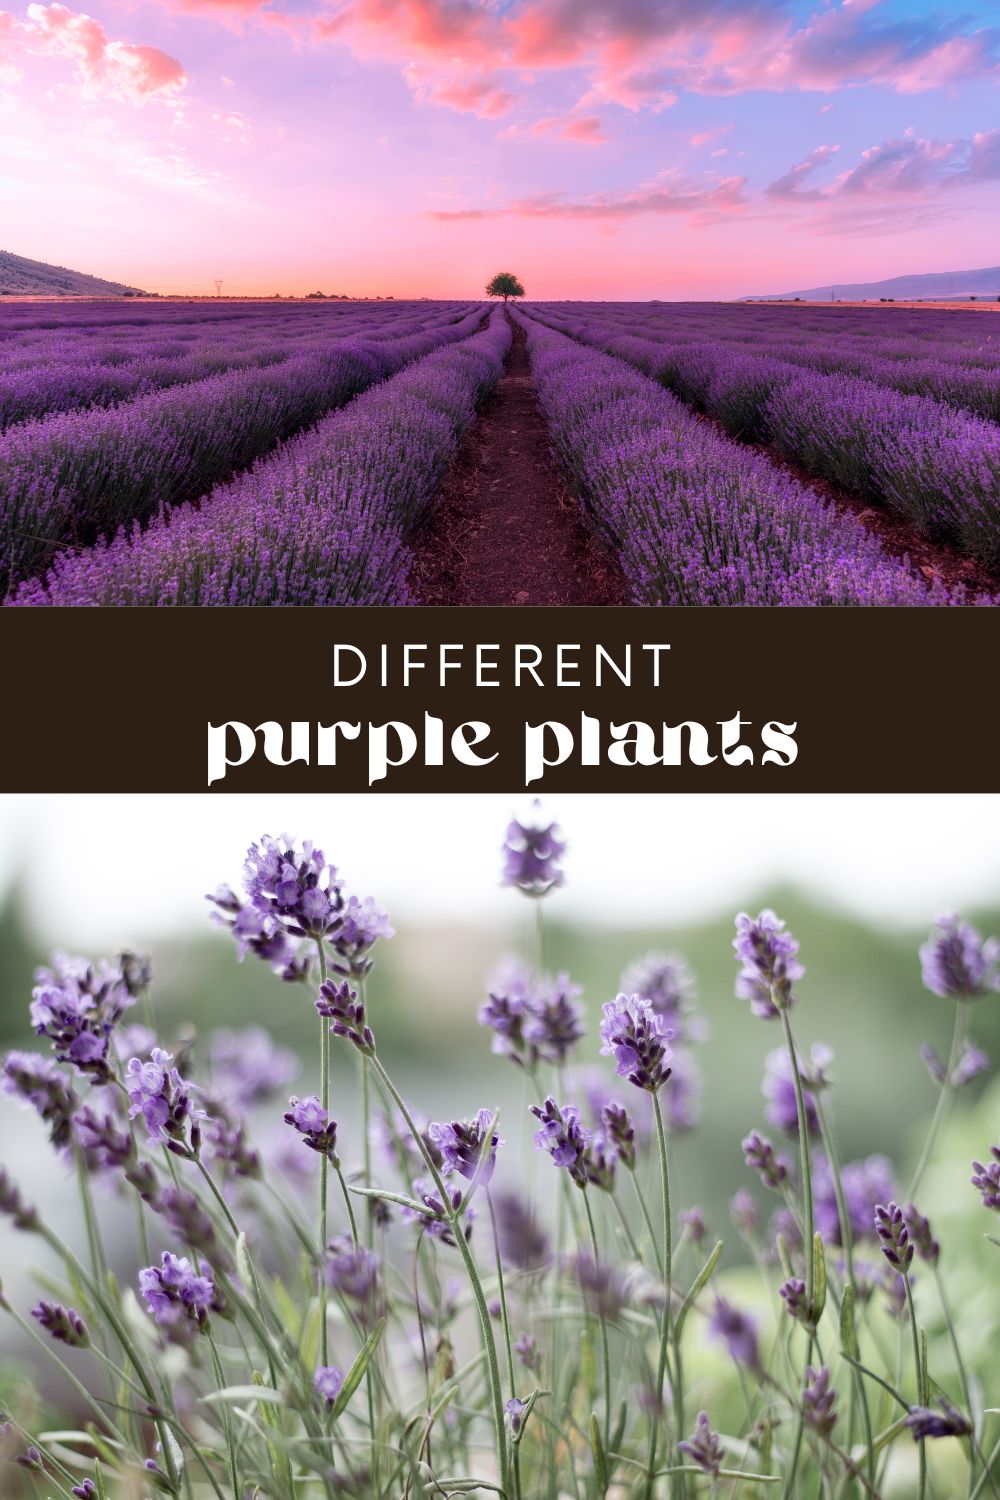 Curating a garden, be it indoor or outdoor, is an art form in itself. The world is full of many flower types, and choosing the right ones to suit your space takes a bit of research. If you're looking to add some color and variety to your garden, purple flowers are definitely worth considering.